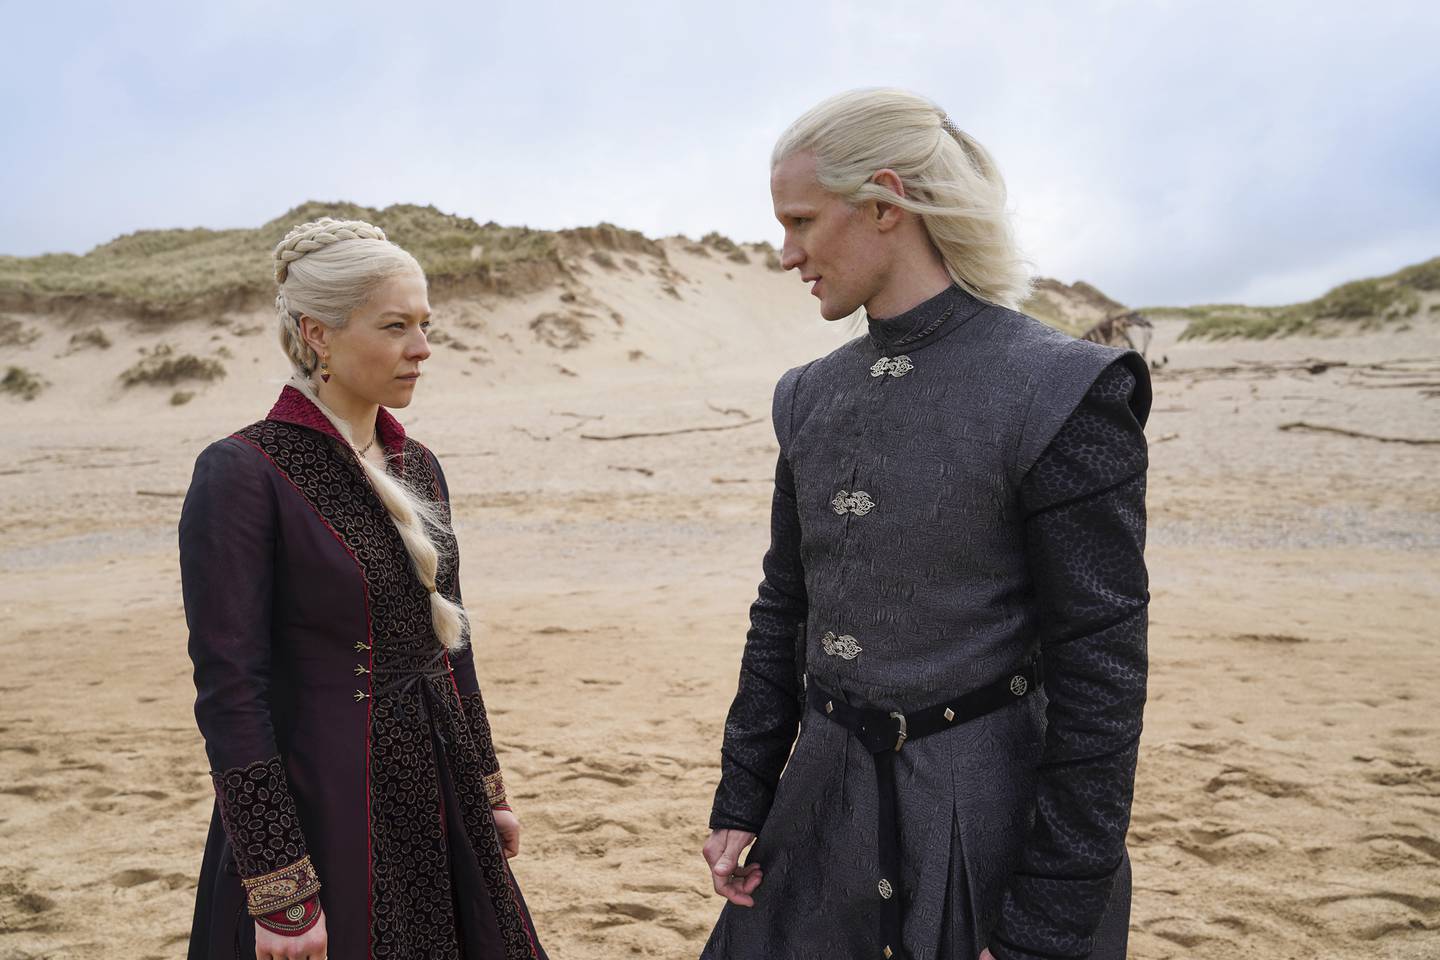 The Targaryens from 'House of the Dragon' would do well to let go of their quest for control, and simply breathe. AP